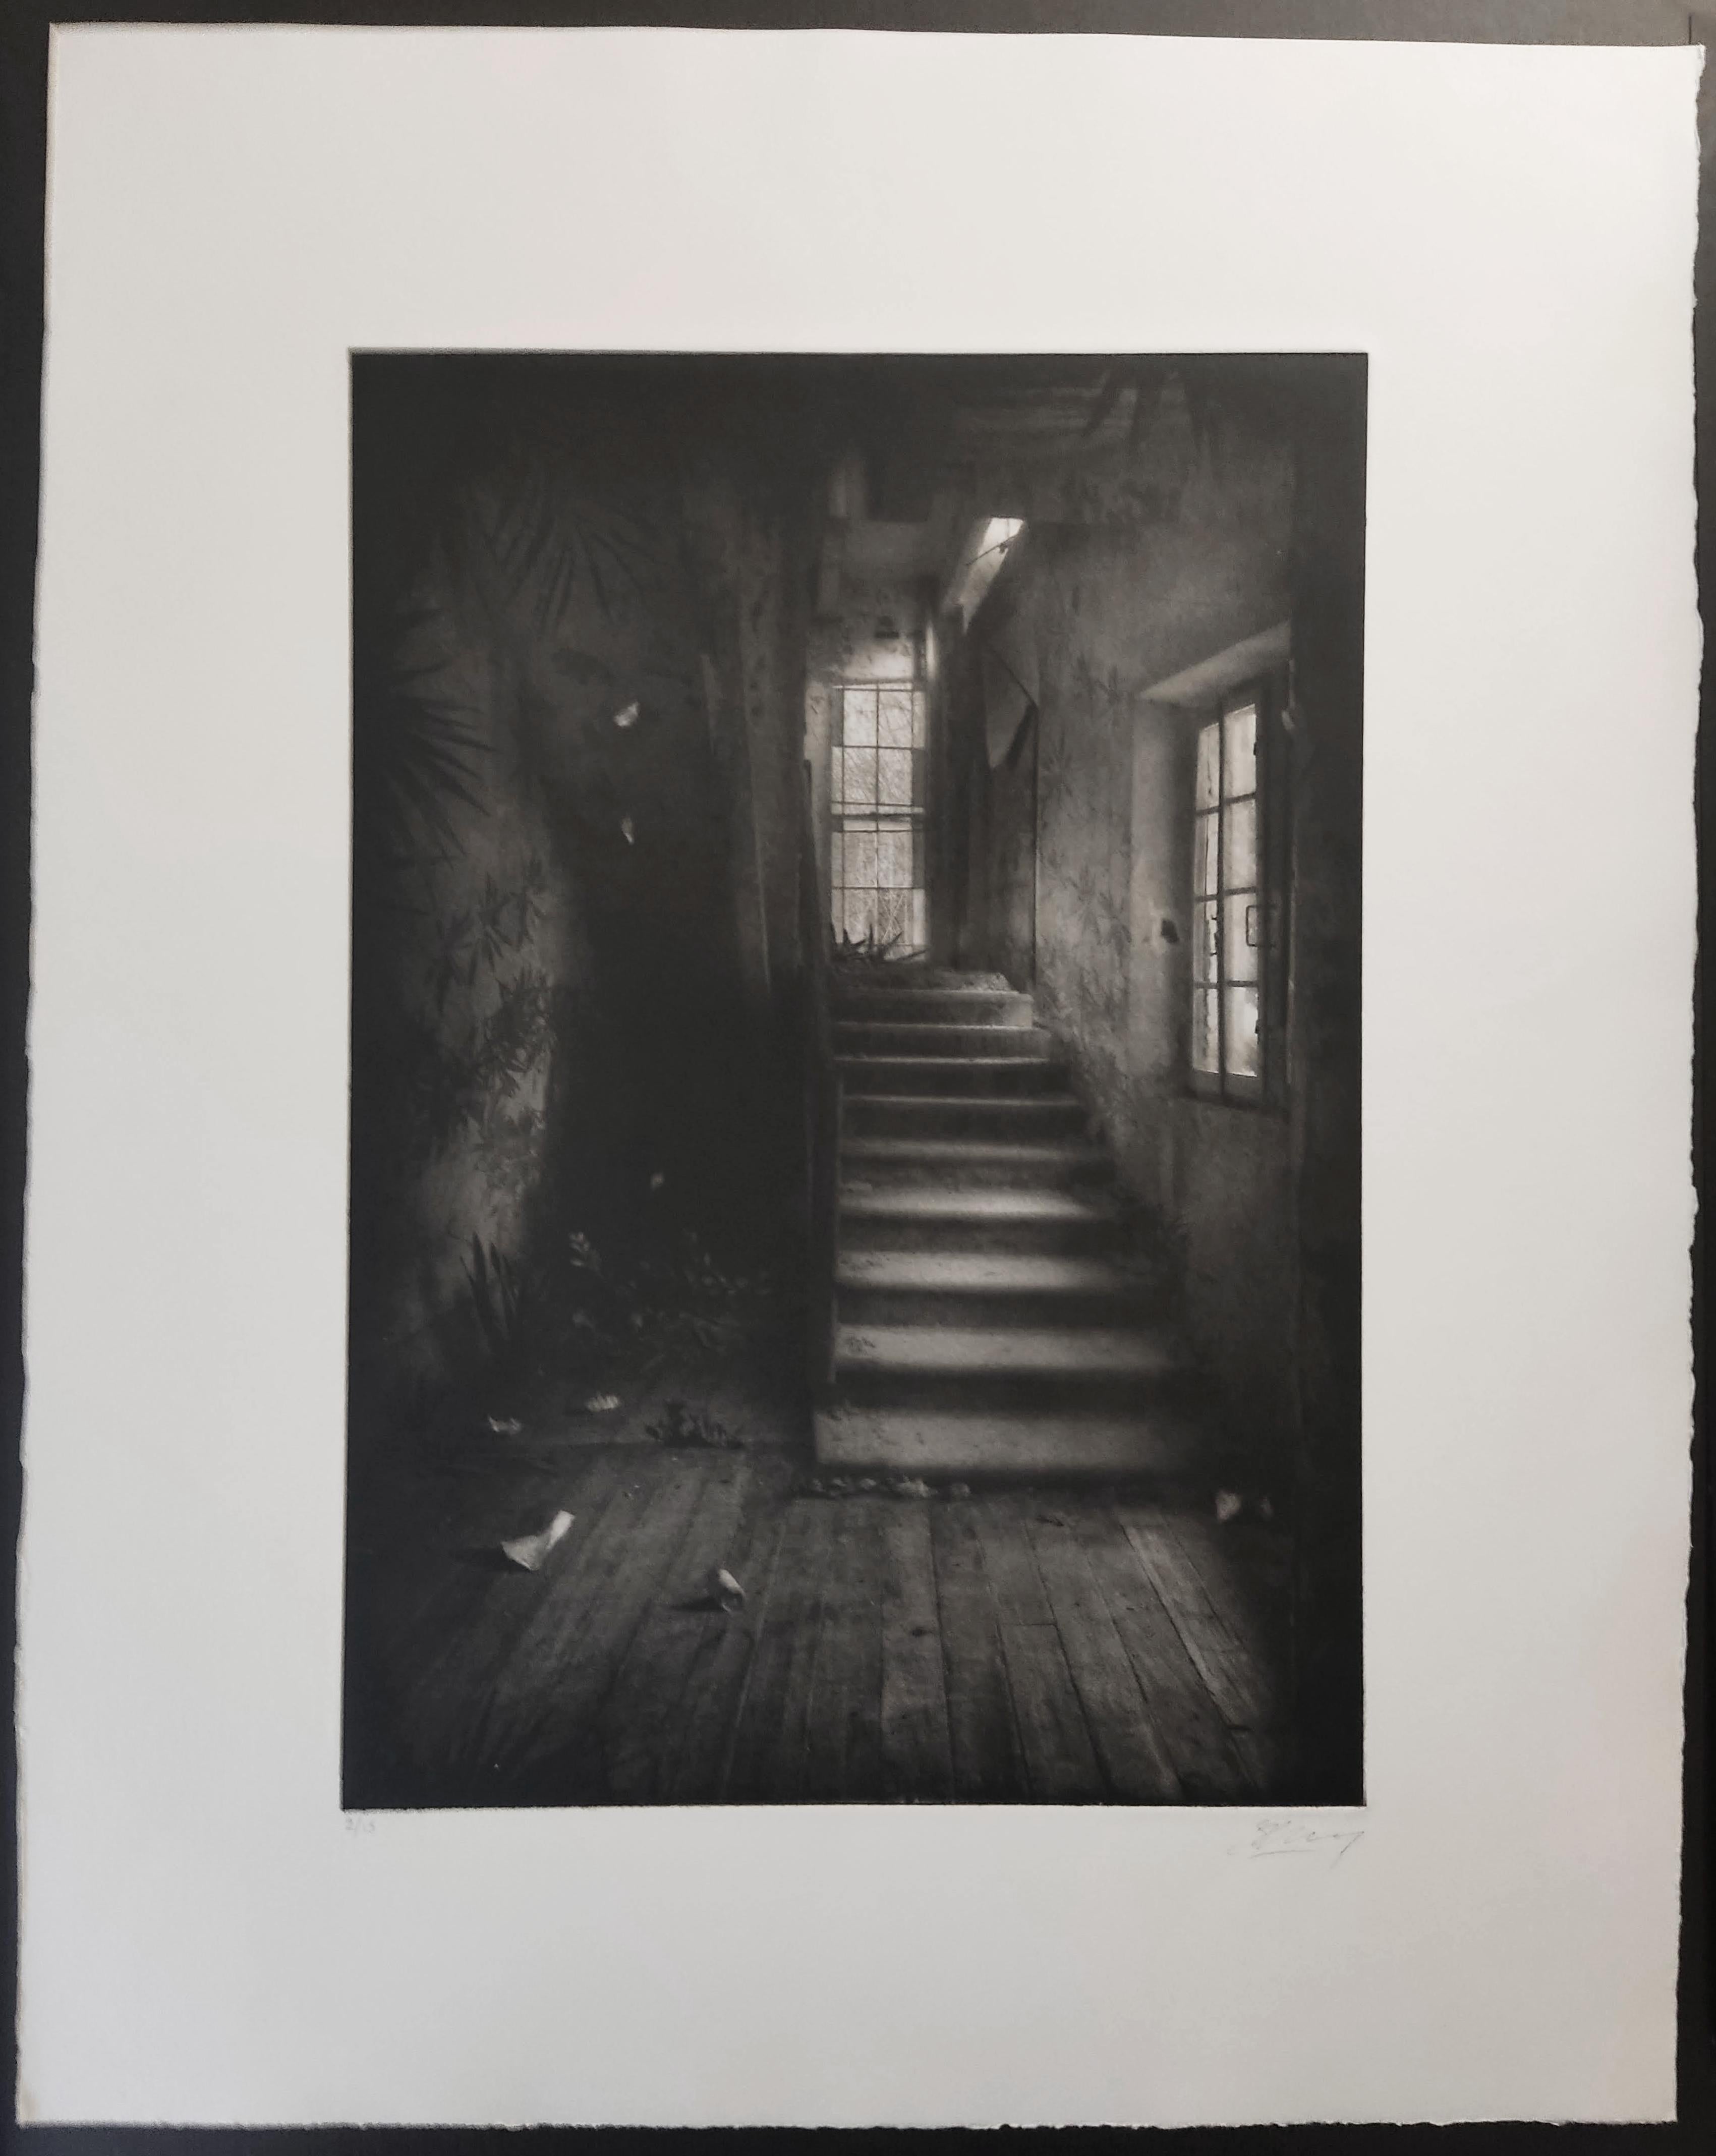 Stairway with Vegetation, Interior Staircase, Photomontage, Gravure, Etching - Photograph by Suzanne Moxhay